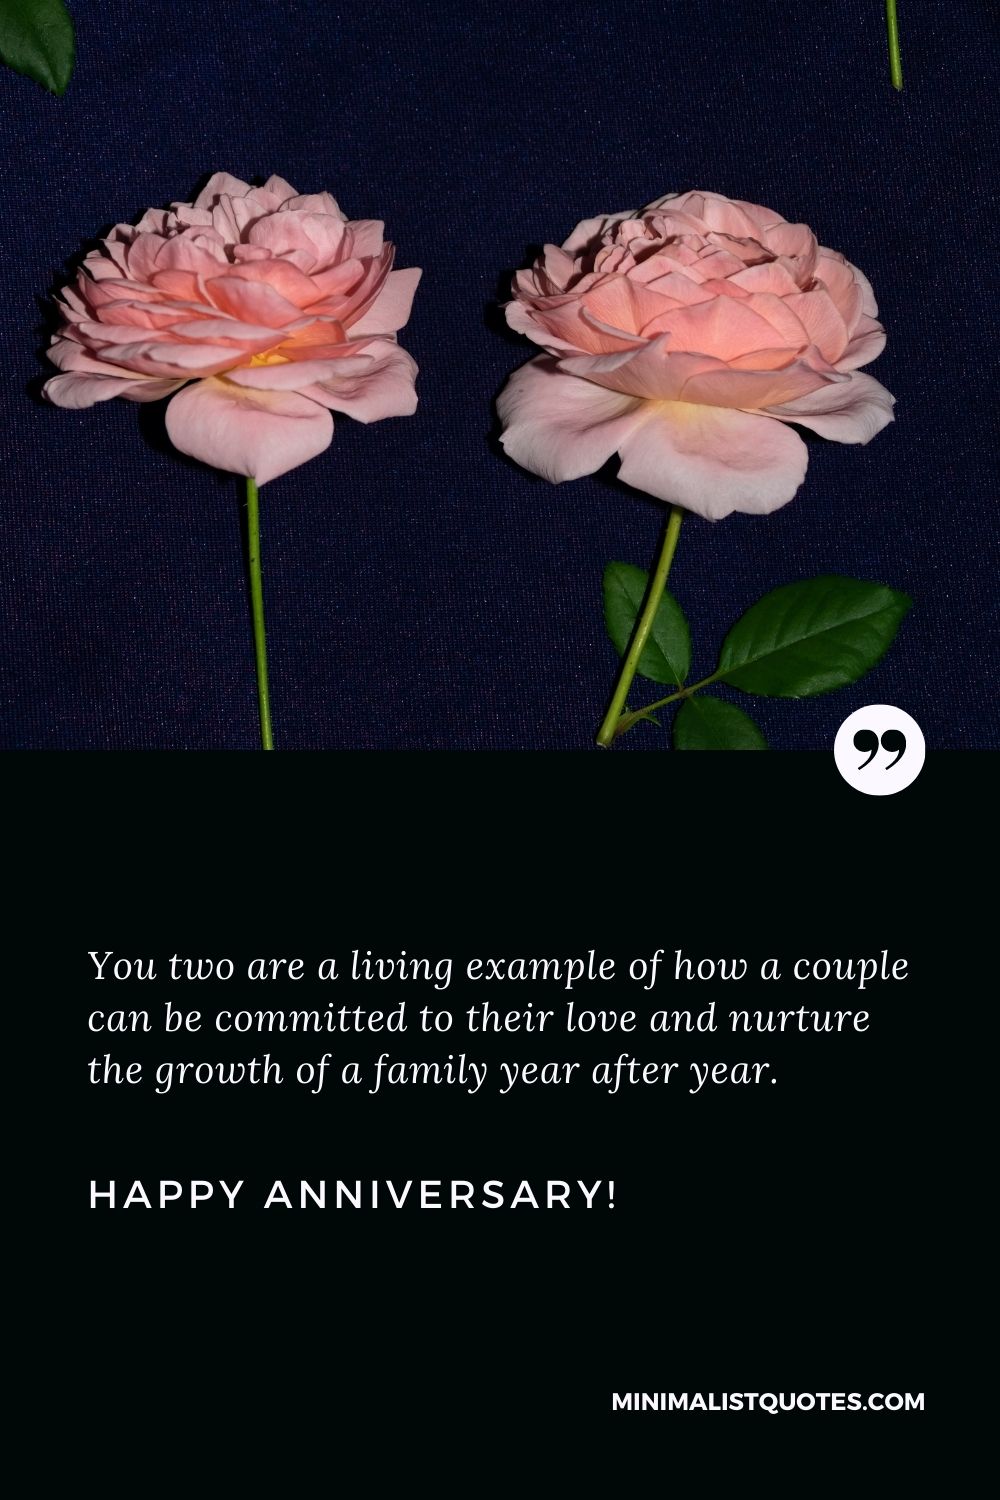 Anniversary wishes for parents: You two are a living example of how a couple can be committed to their love and nurture the growth of a family year after year. Happy Anniversary!